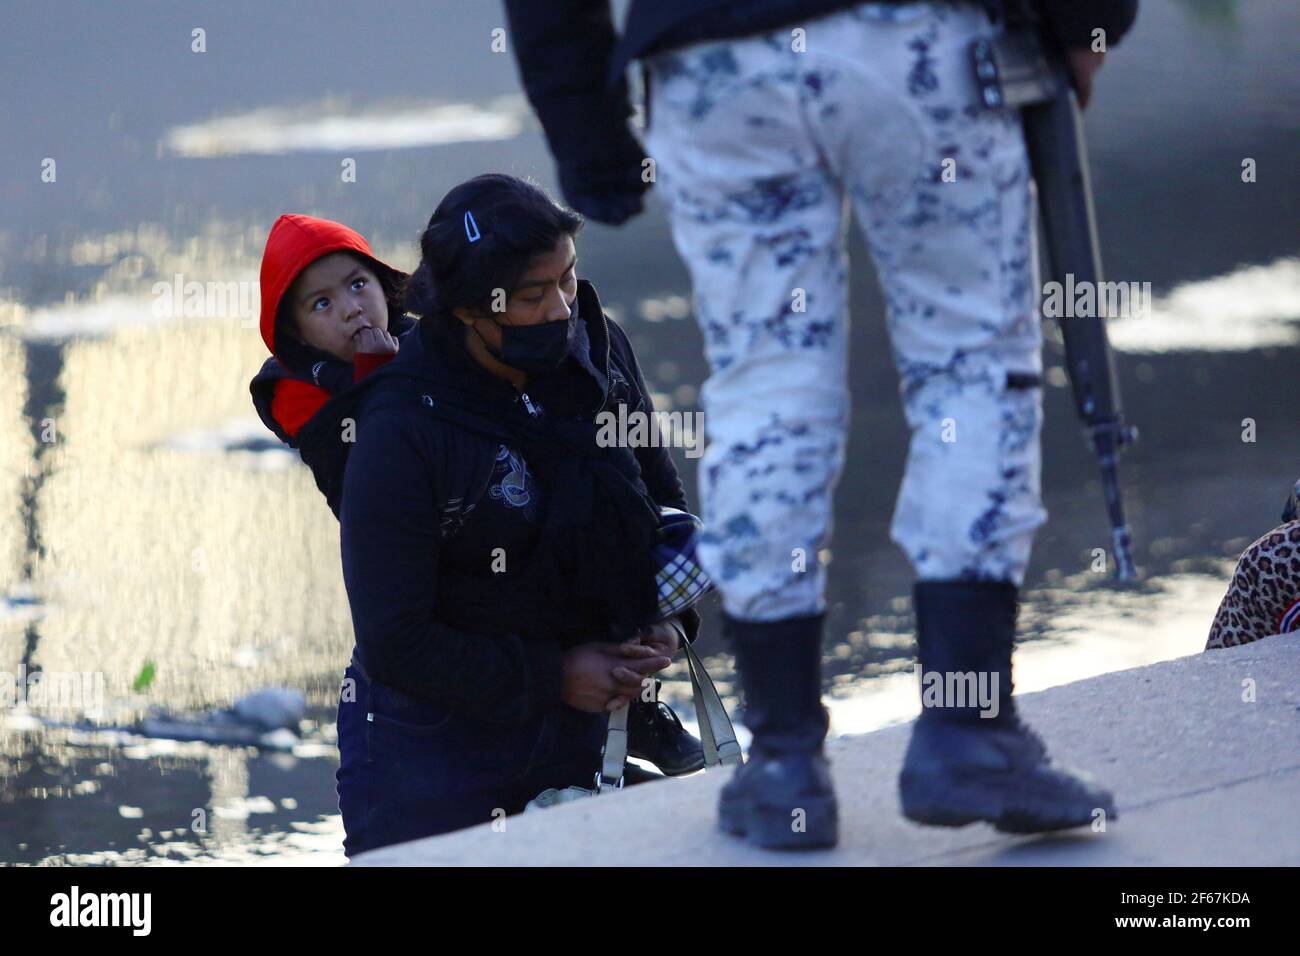 A migrant boy looks to a member of the Guardia Nacional (National guard)  before crossing with his mother the Rio Bravo river to turn themselves into U.S Border Patrol agents to request asylum in El Paso, Texas, U.S., as seen from Ciudad Juarez, Mexico, March 30, 2021. REUTERS/Edgard Garrido Stock Photo